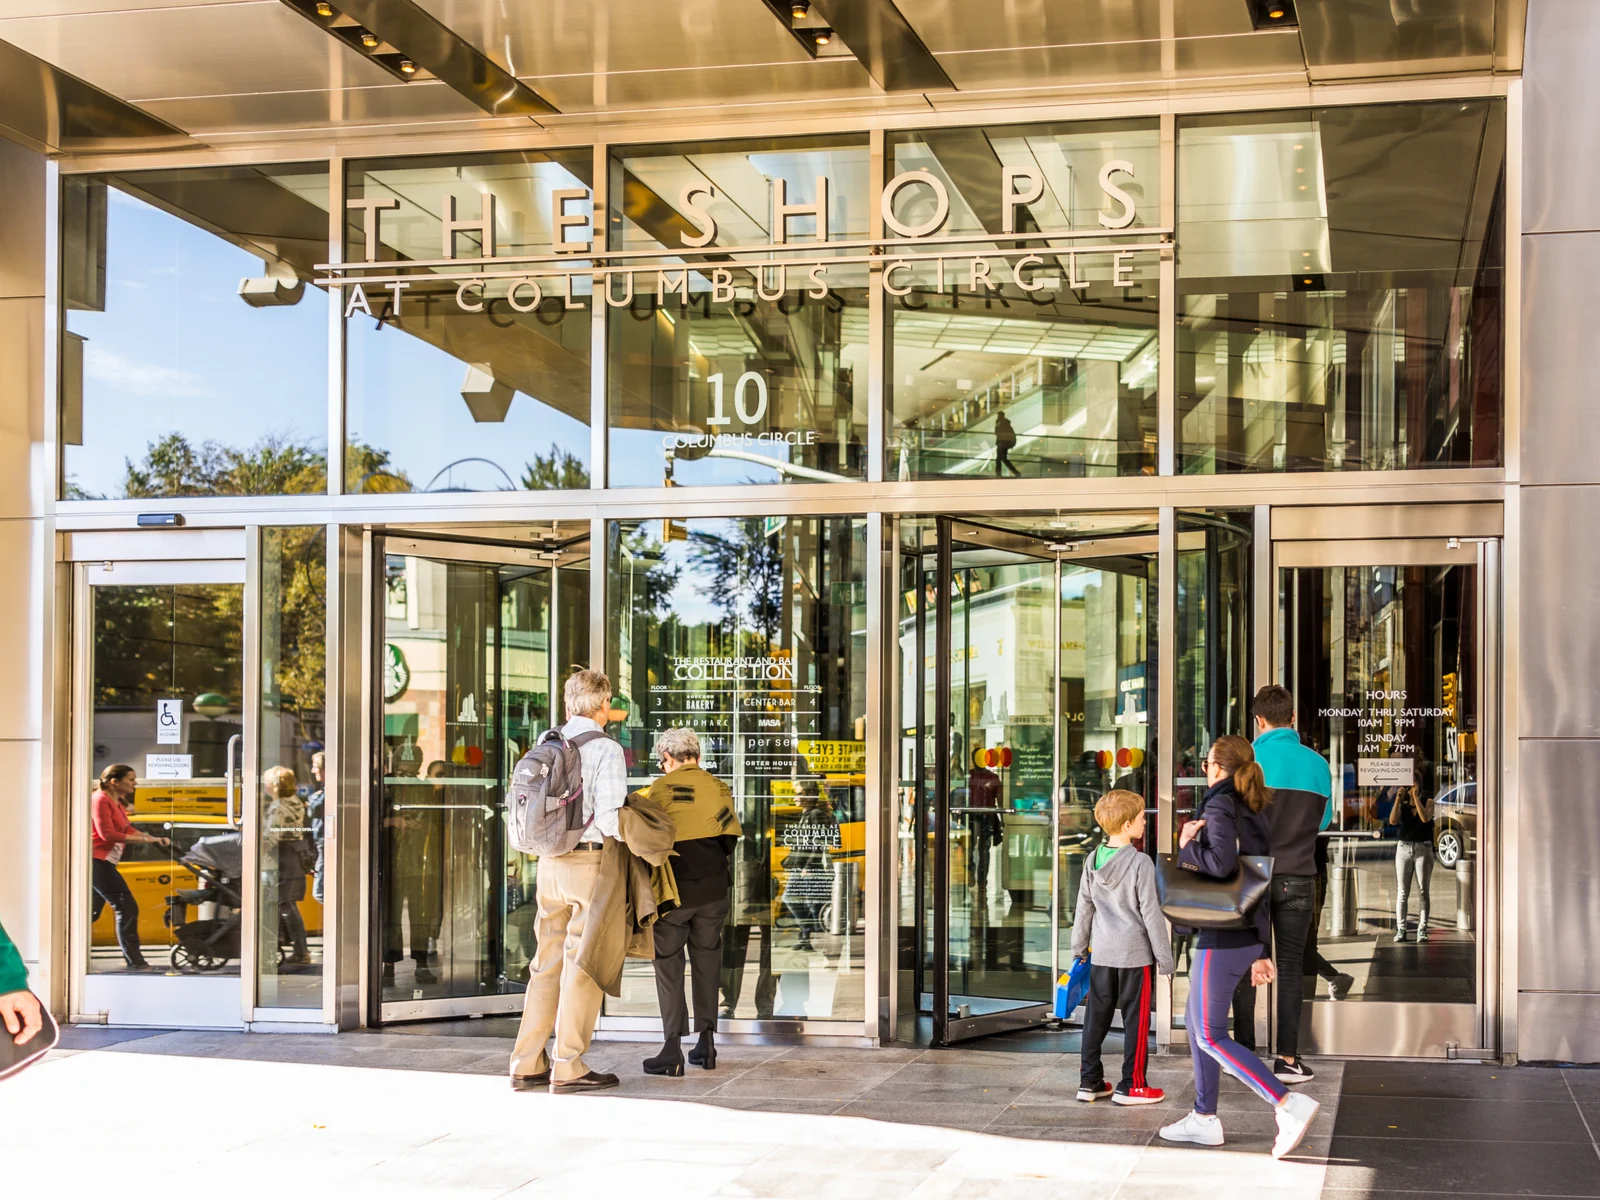 Shoppers going in through the revolving door at the entrance of The Shops at Columbus Circle in New York, considered one of the best malls in America